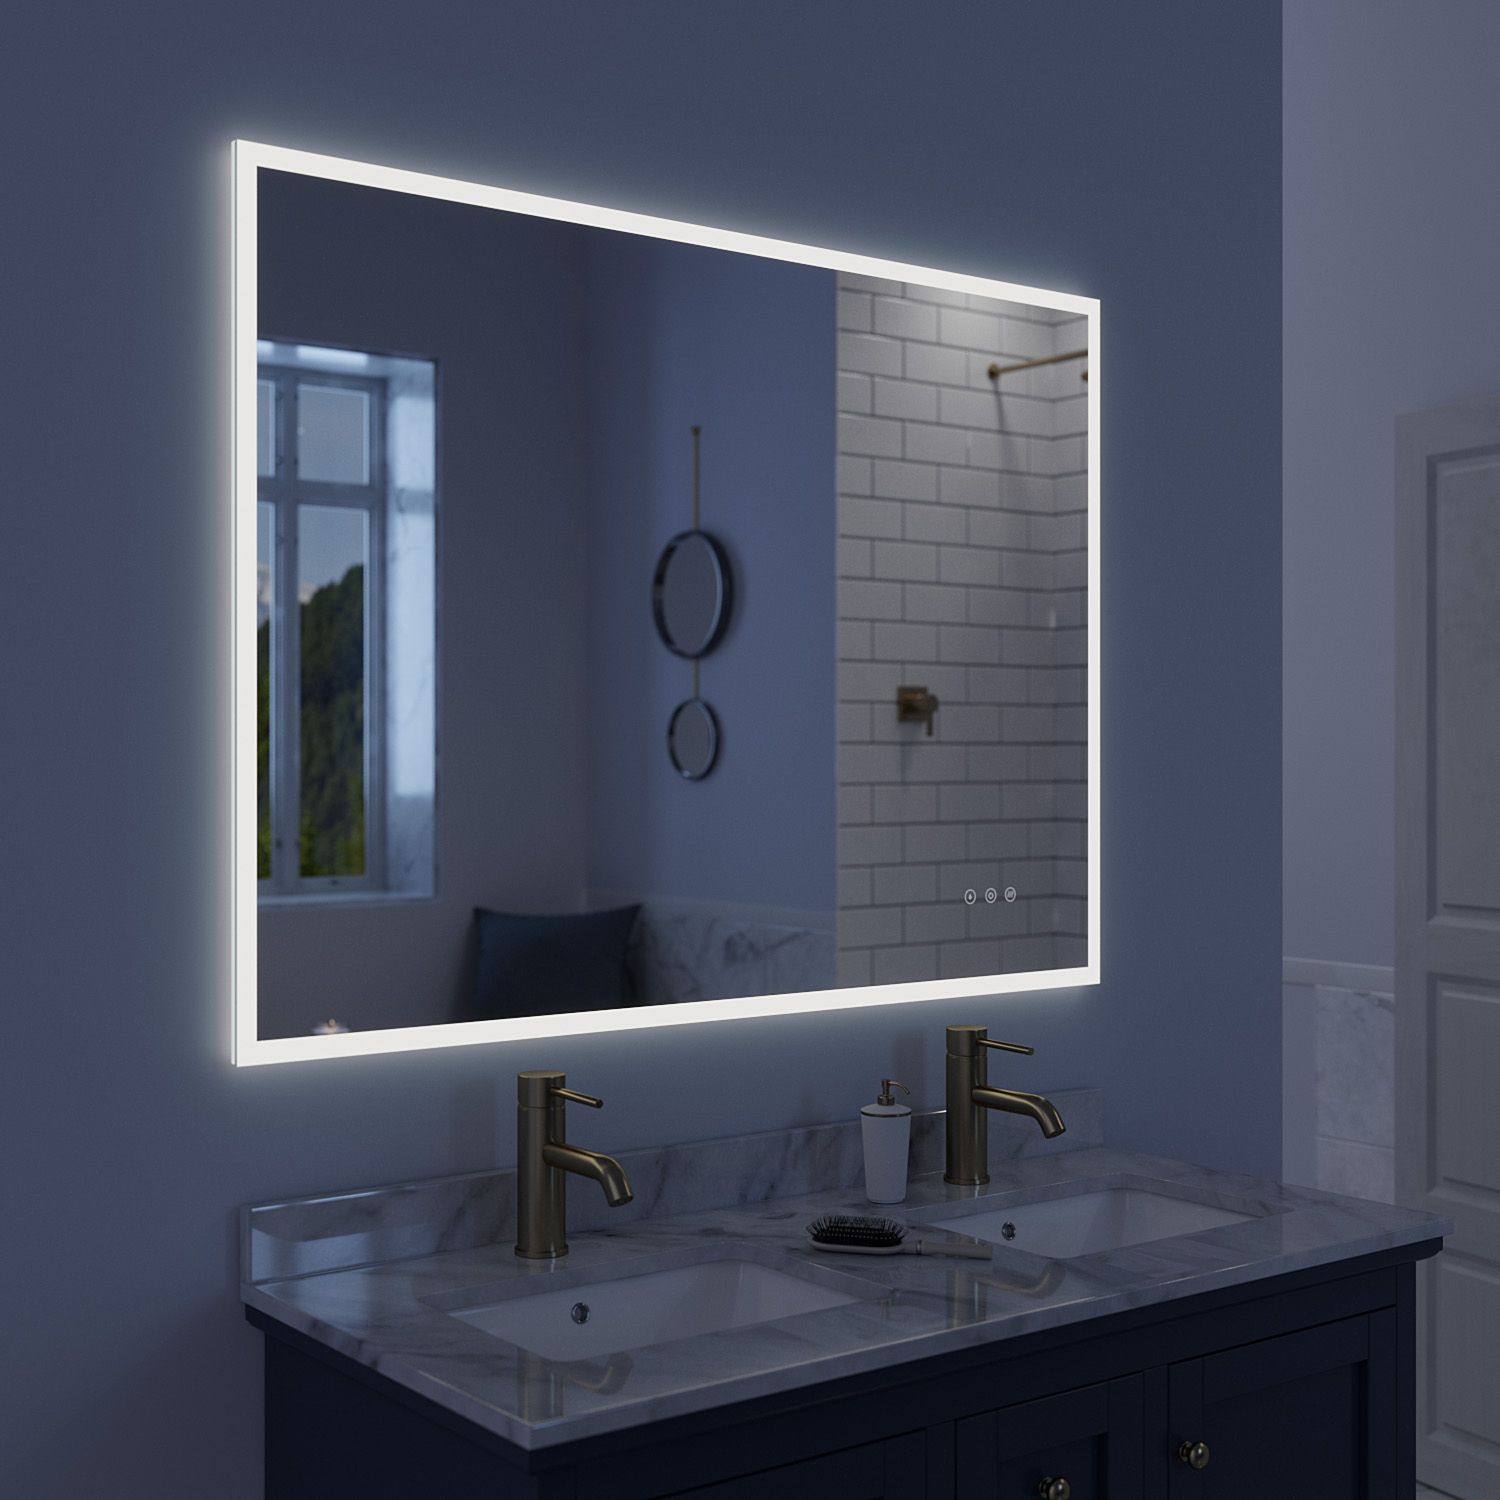 Luxaar Lucent 48 " X 36 " Wall Mounted Led Vanity Mirror With Color For Vanity Mirrors (View 3 of 15)